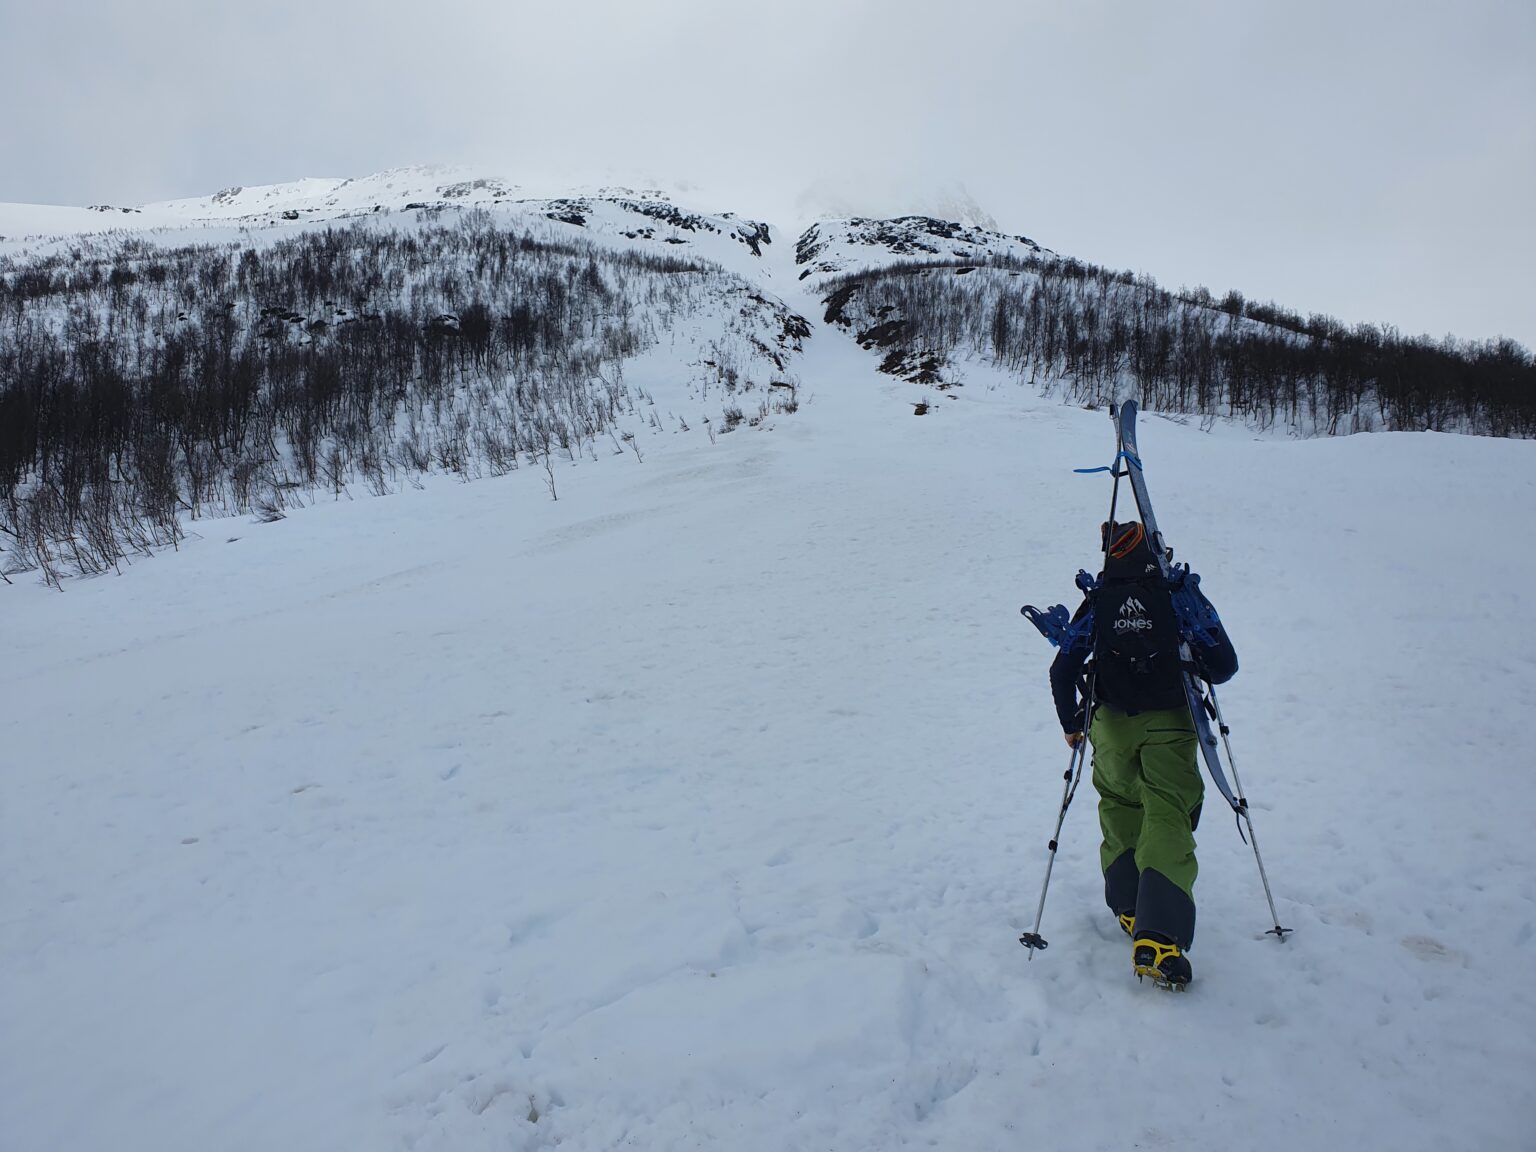 Climbing up the south gully of Tamokfjellet in the Tamokdalen Backcountry